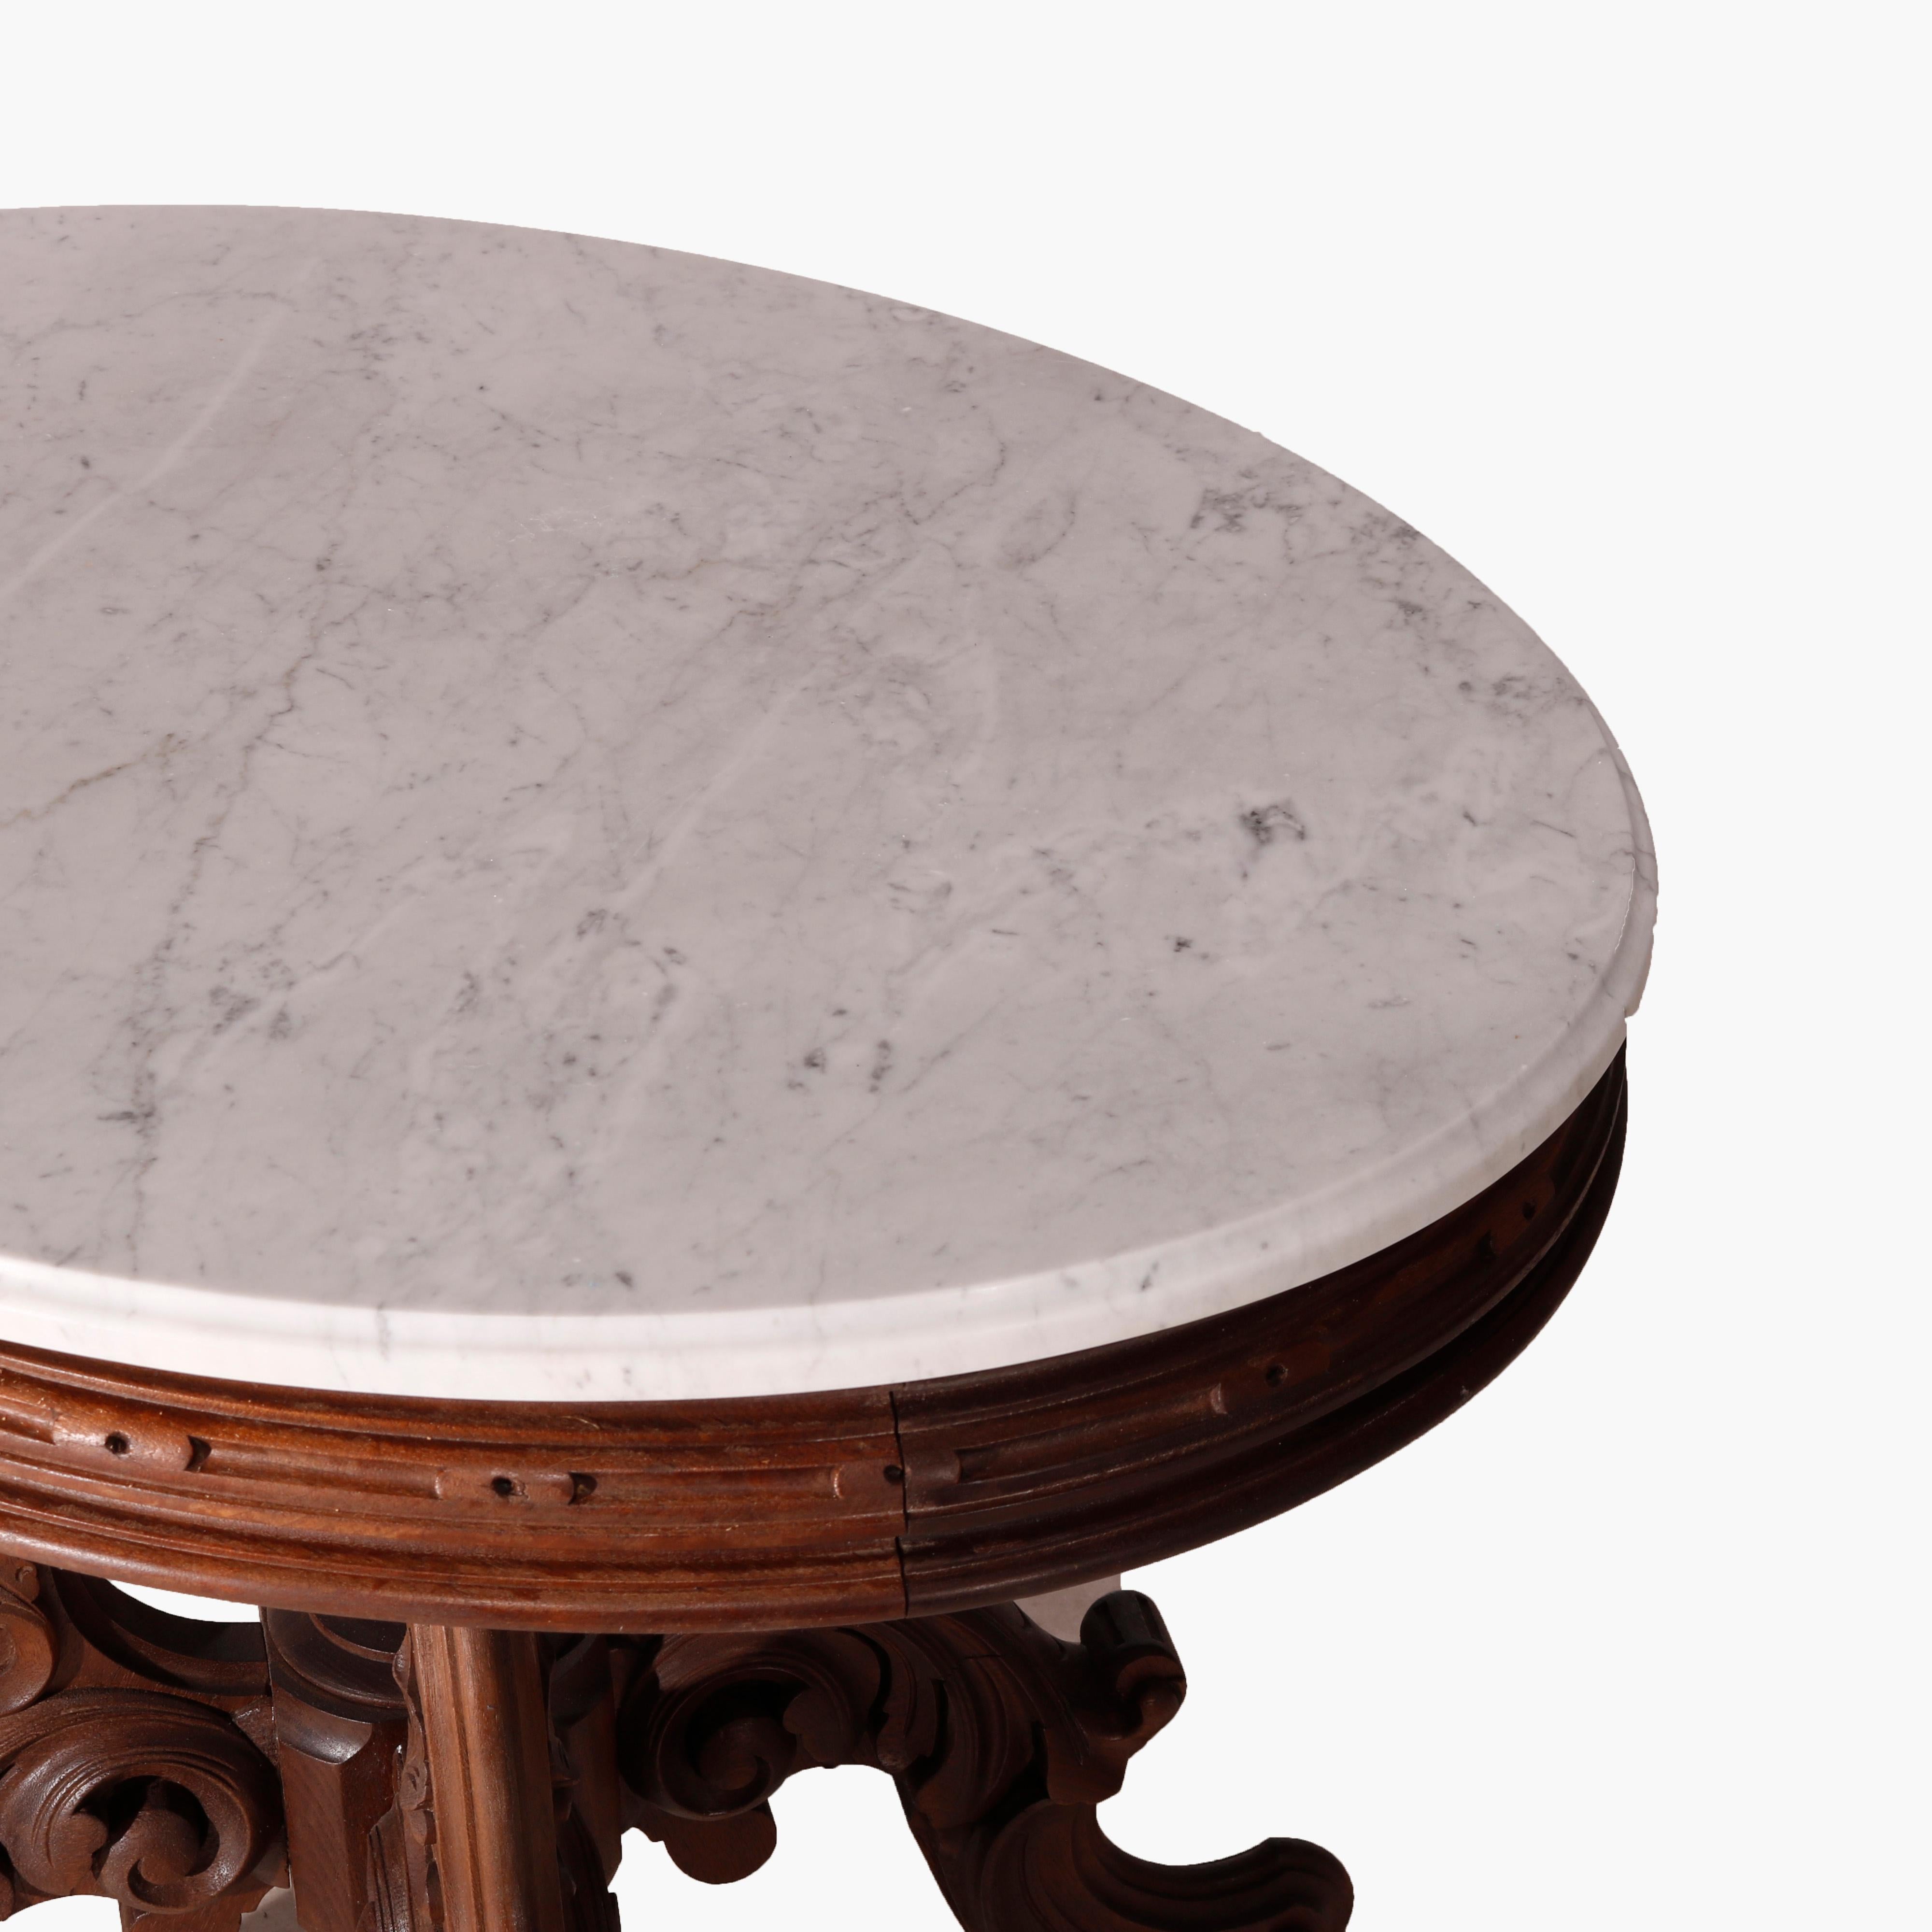 American Oversized Antique Victorian Walnut Brooks Oval Marble Top Parlor Table 1890 For Sale